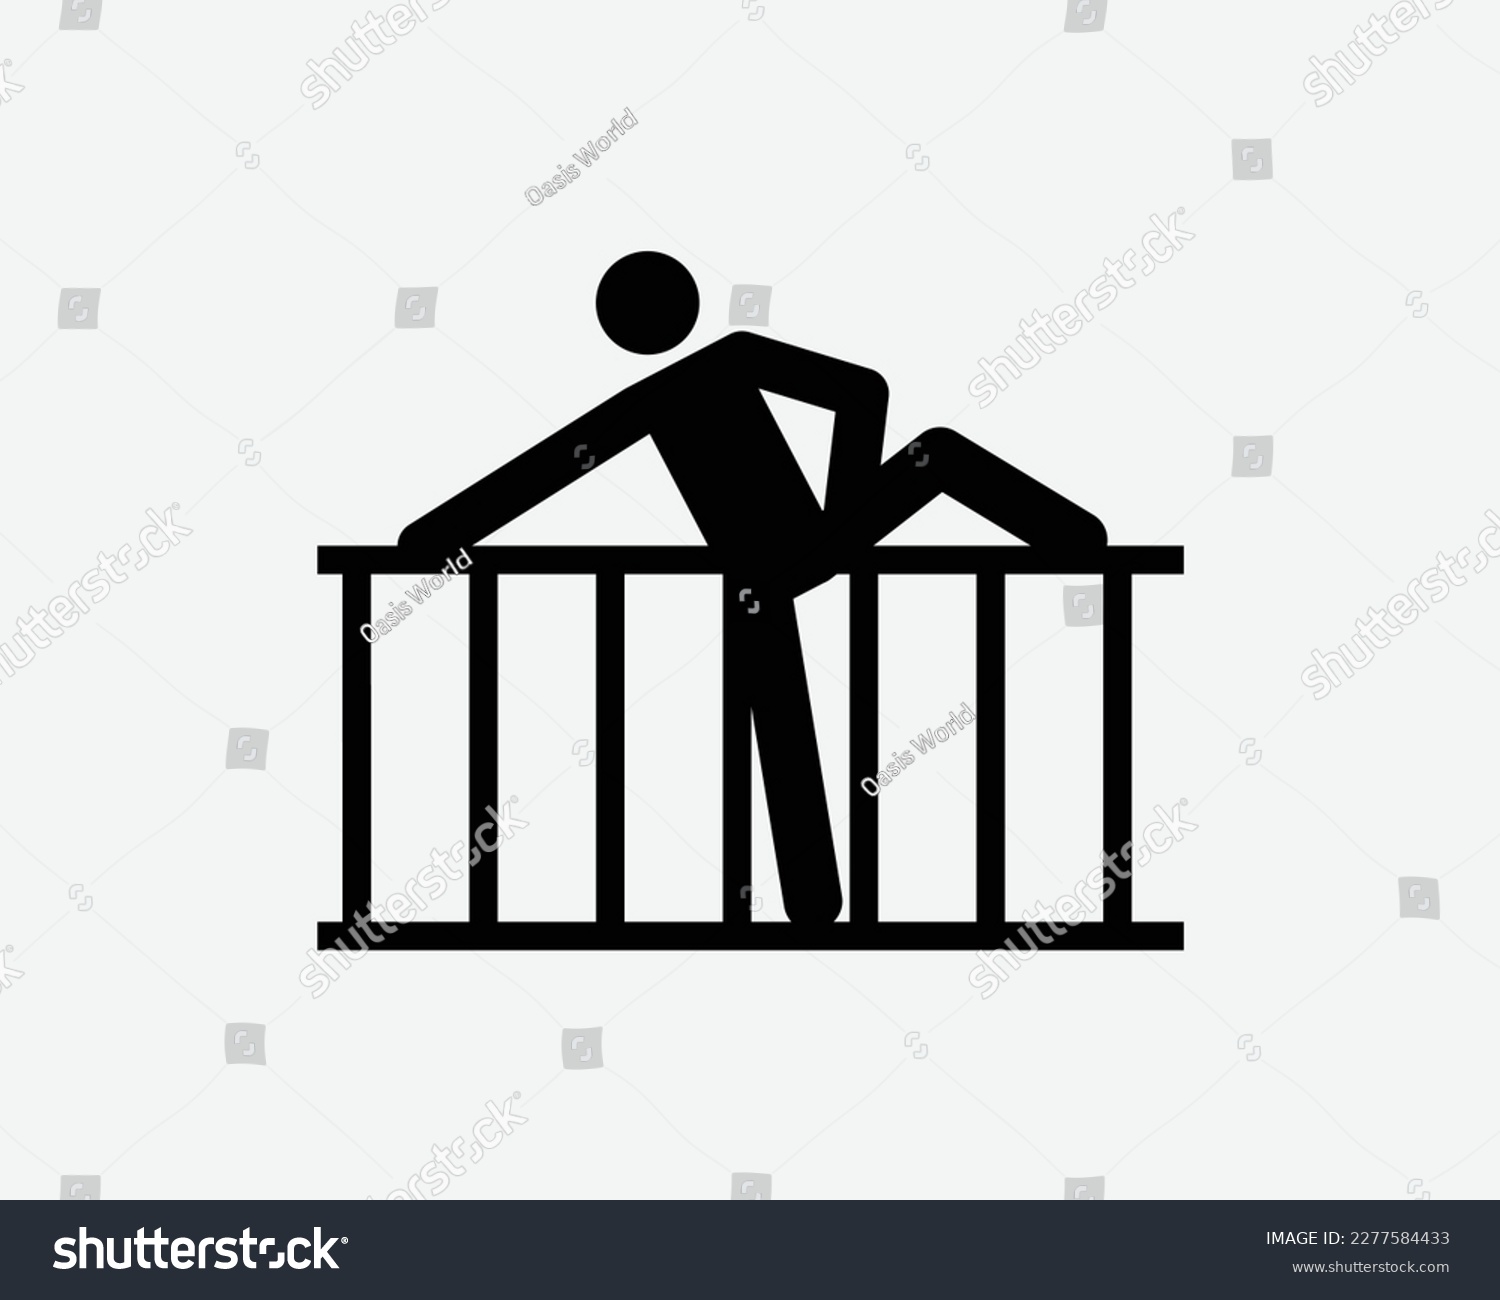 SVG of Climbing Fence Icon Climb Over Barrier Trespassing Intruder Vector Black White Silhouette Symbol Sign Graphic Clipart Artwork Illustration Pictogram svg